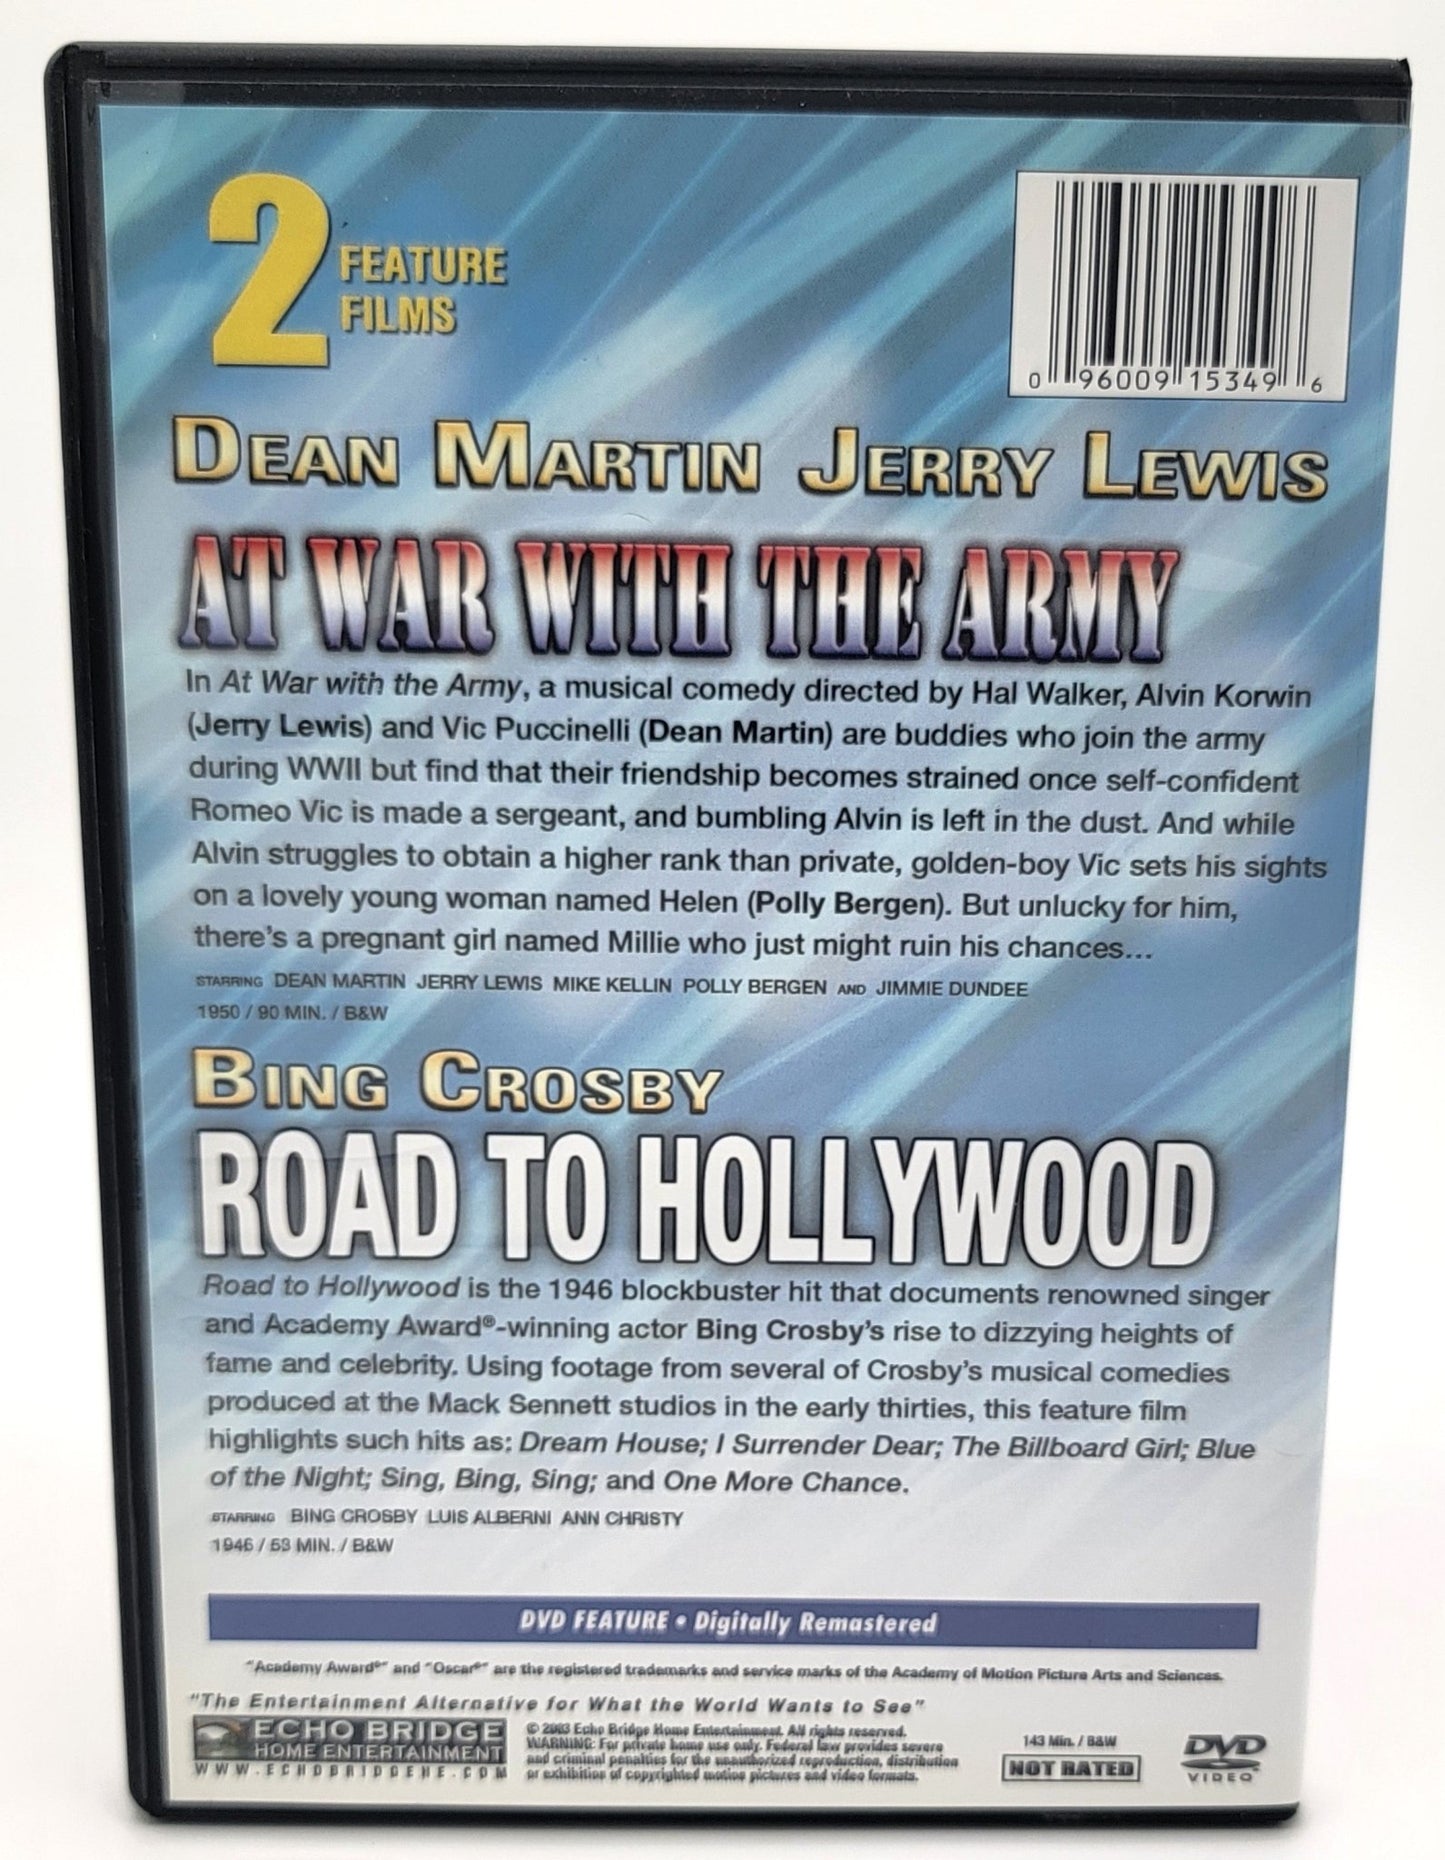 Echo Bridge Home Entertainment - At War with the Army & Road to Hollywood | DVD | Silver Screen Series 2 Feature Films - DVD - Steady Bunny Shop